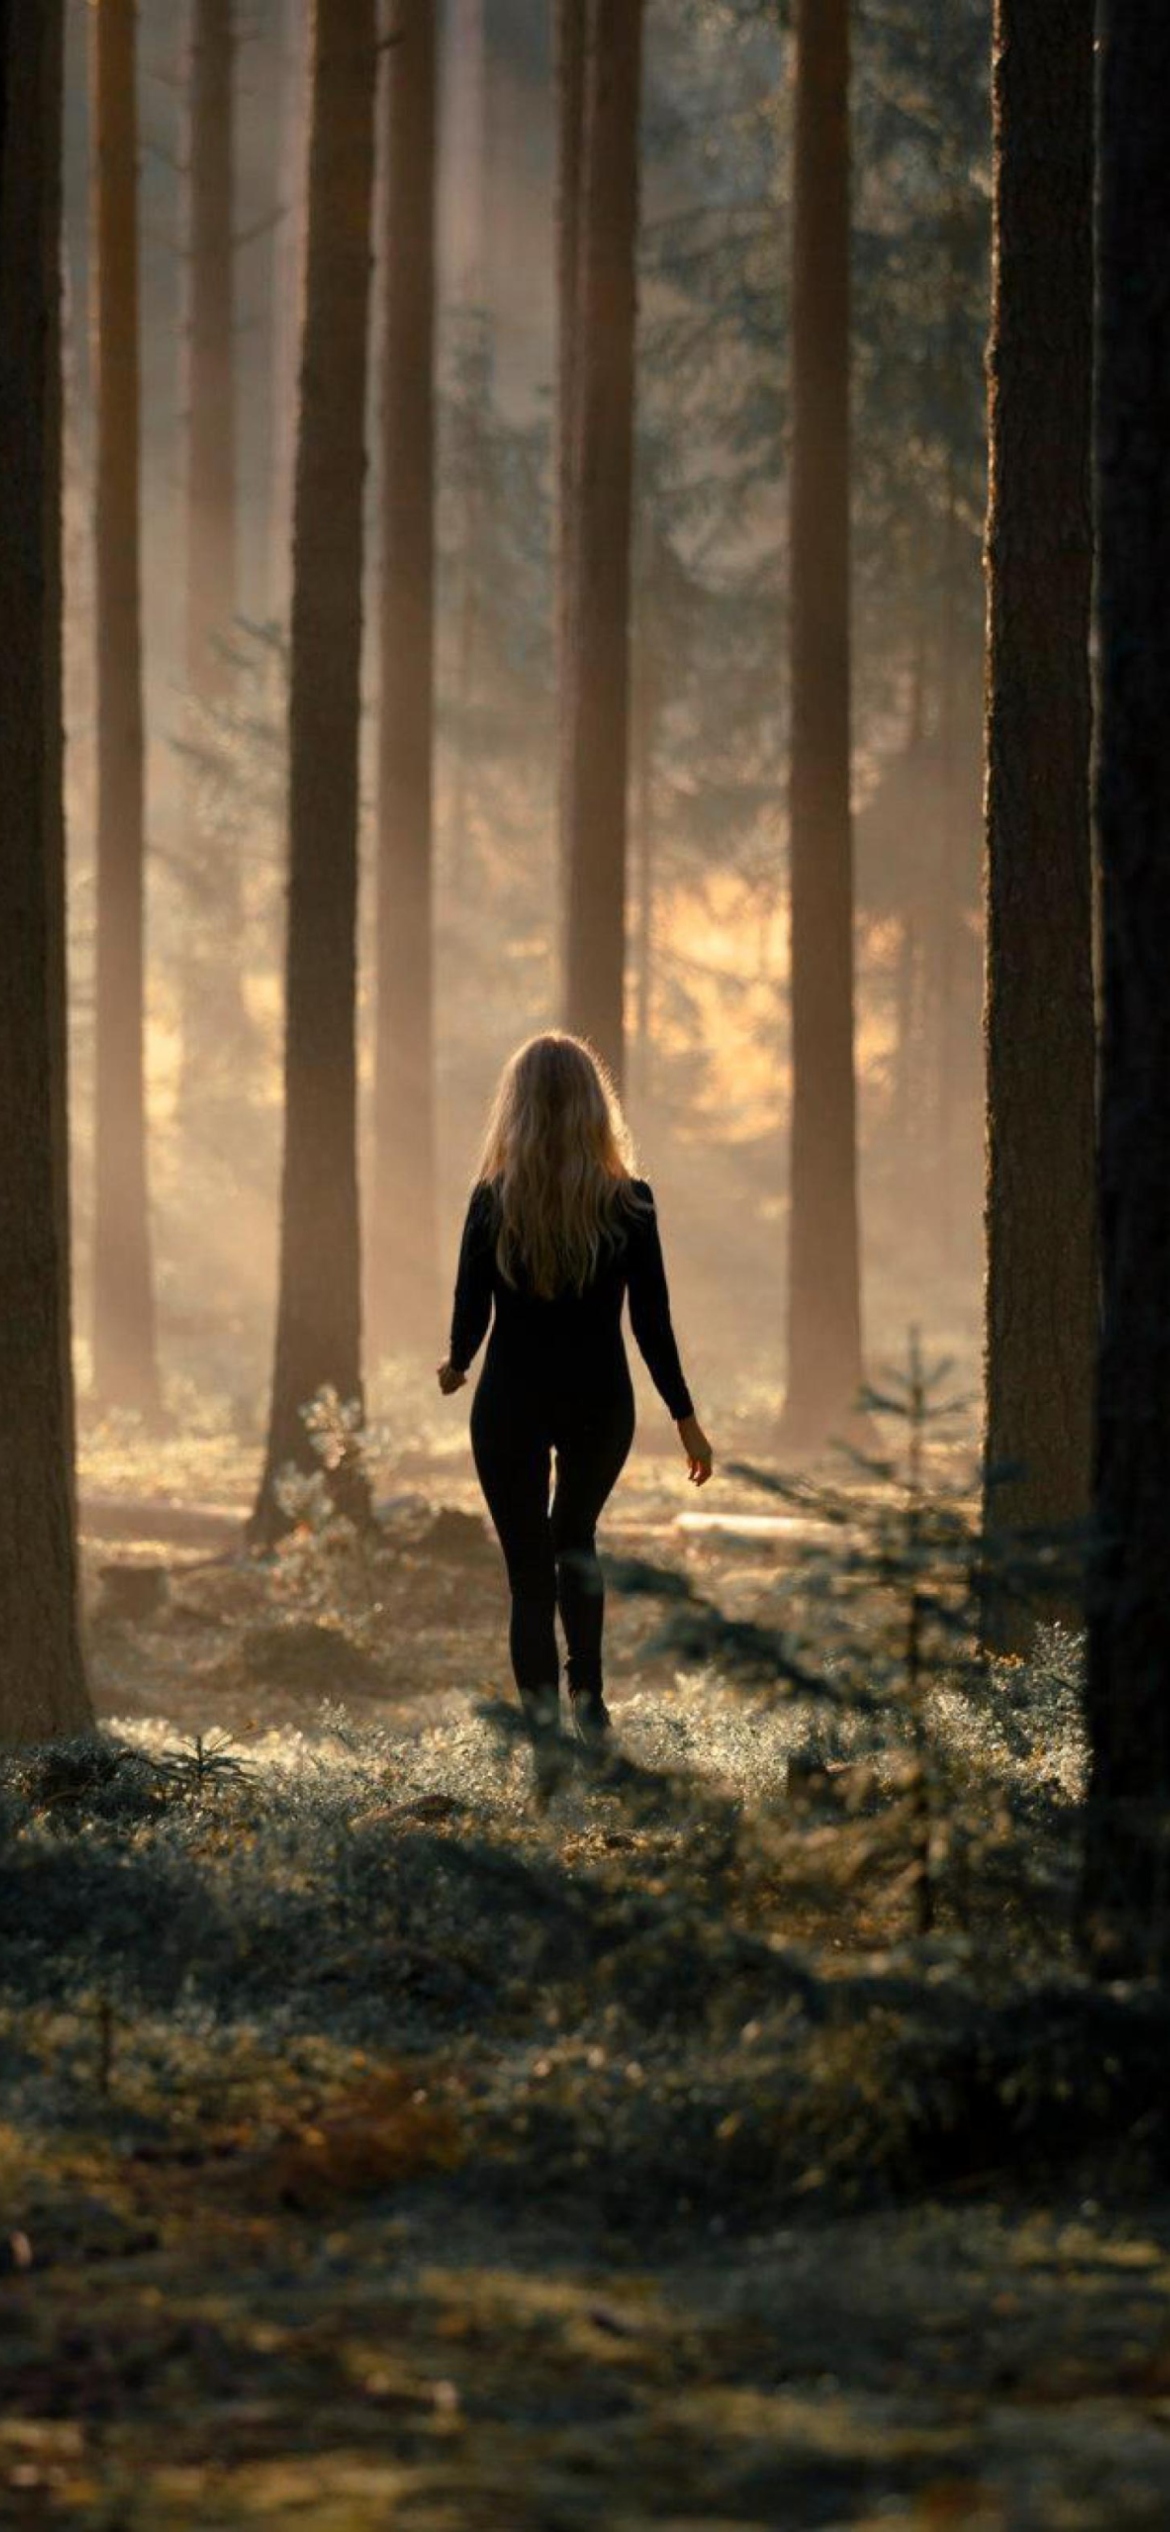 Girl In Forest wallpaper 1170x2532